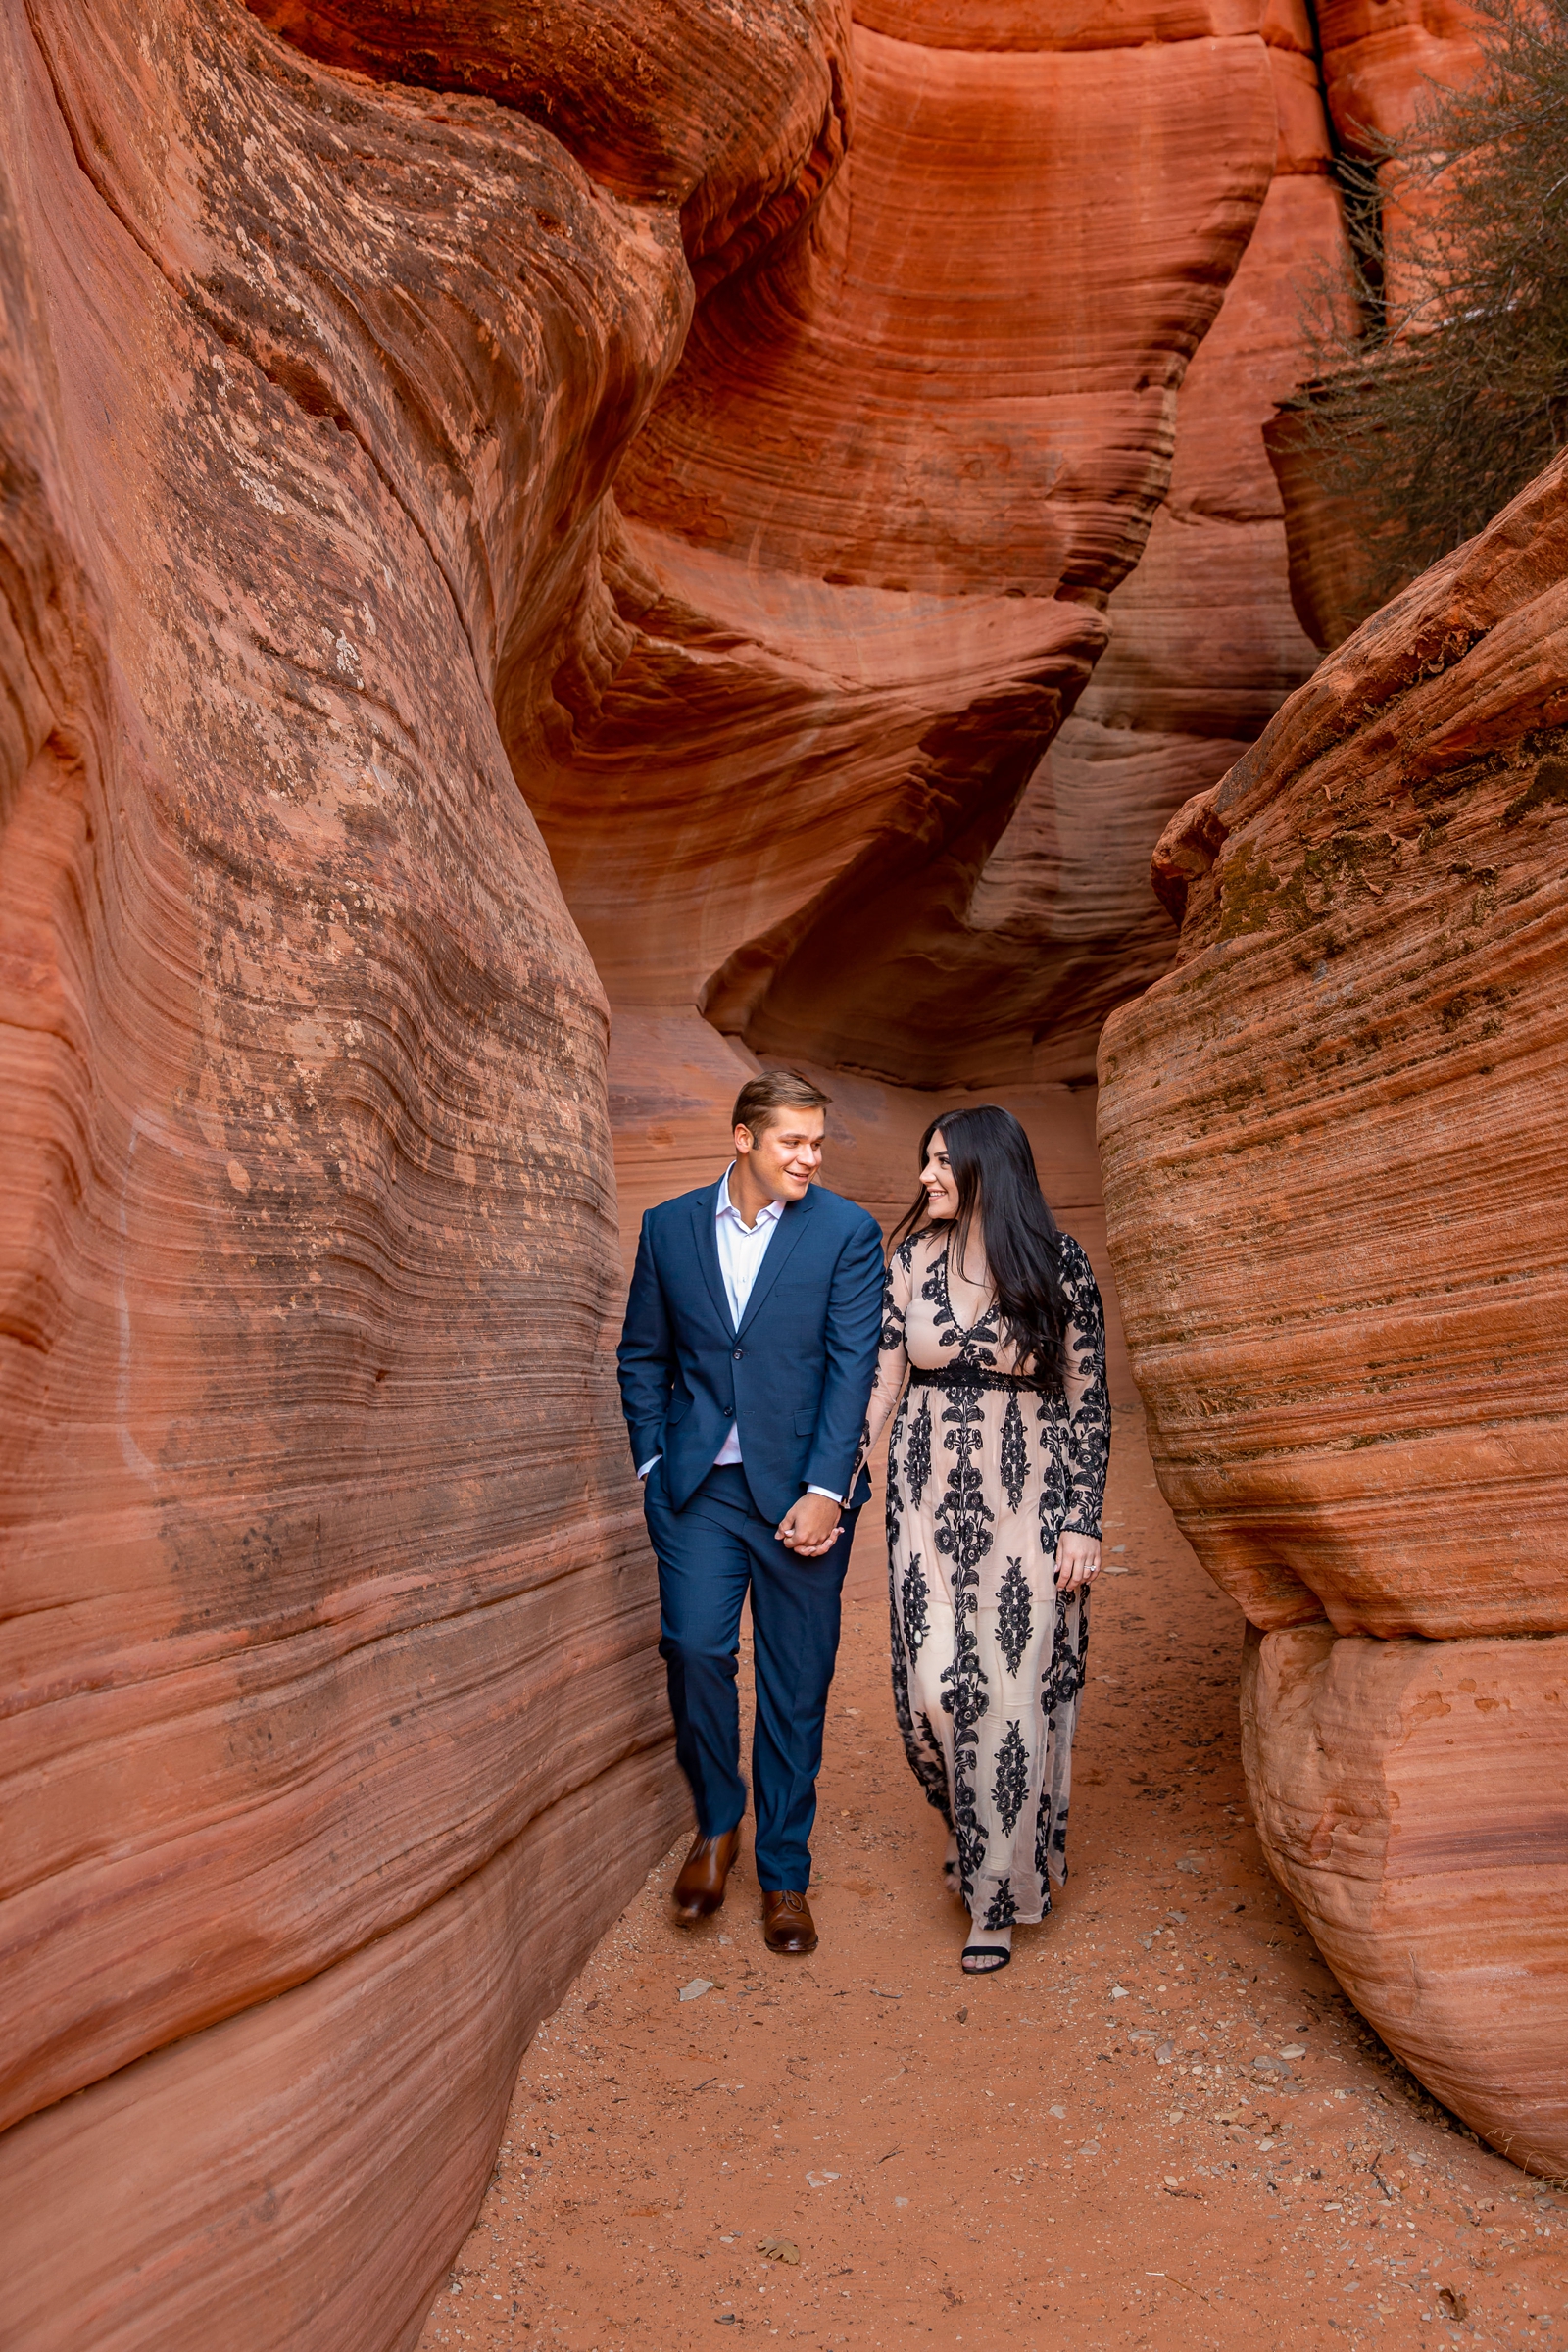 This couple had a Utah slot canyon engagement session.